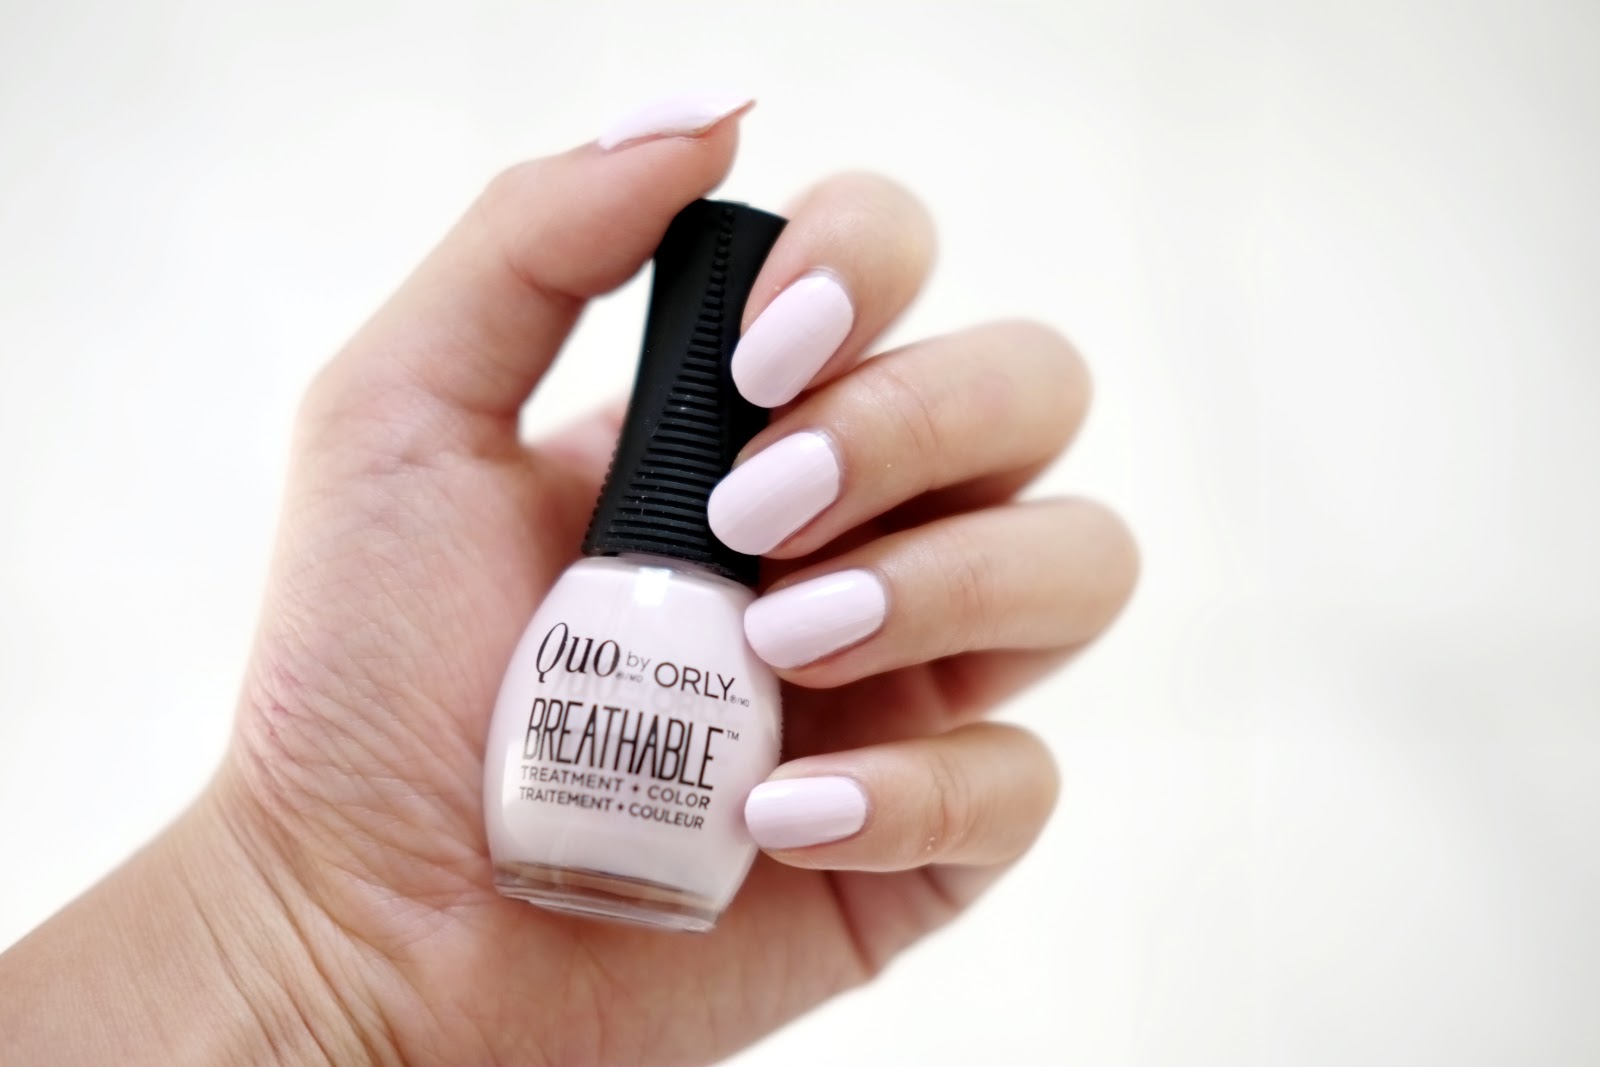 9. Orly Breathable Treatment + Color in "Love My Nails" - wide 8